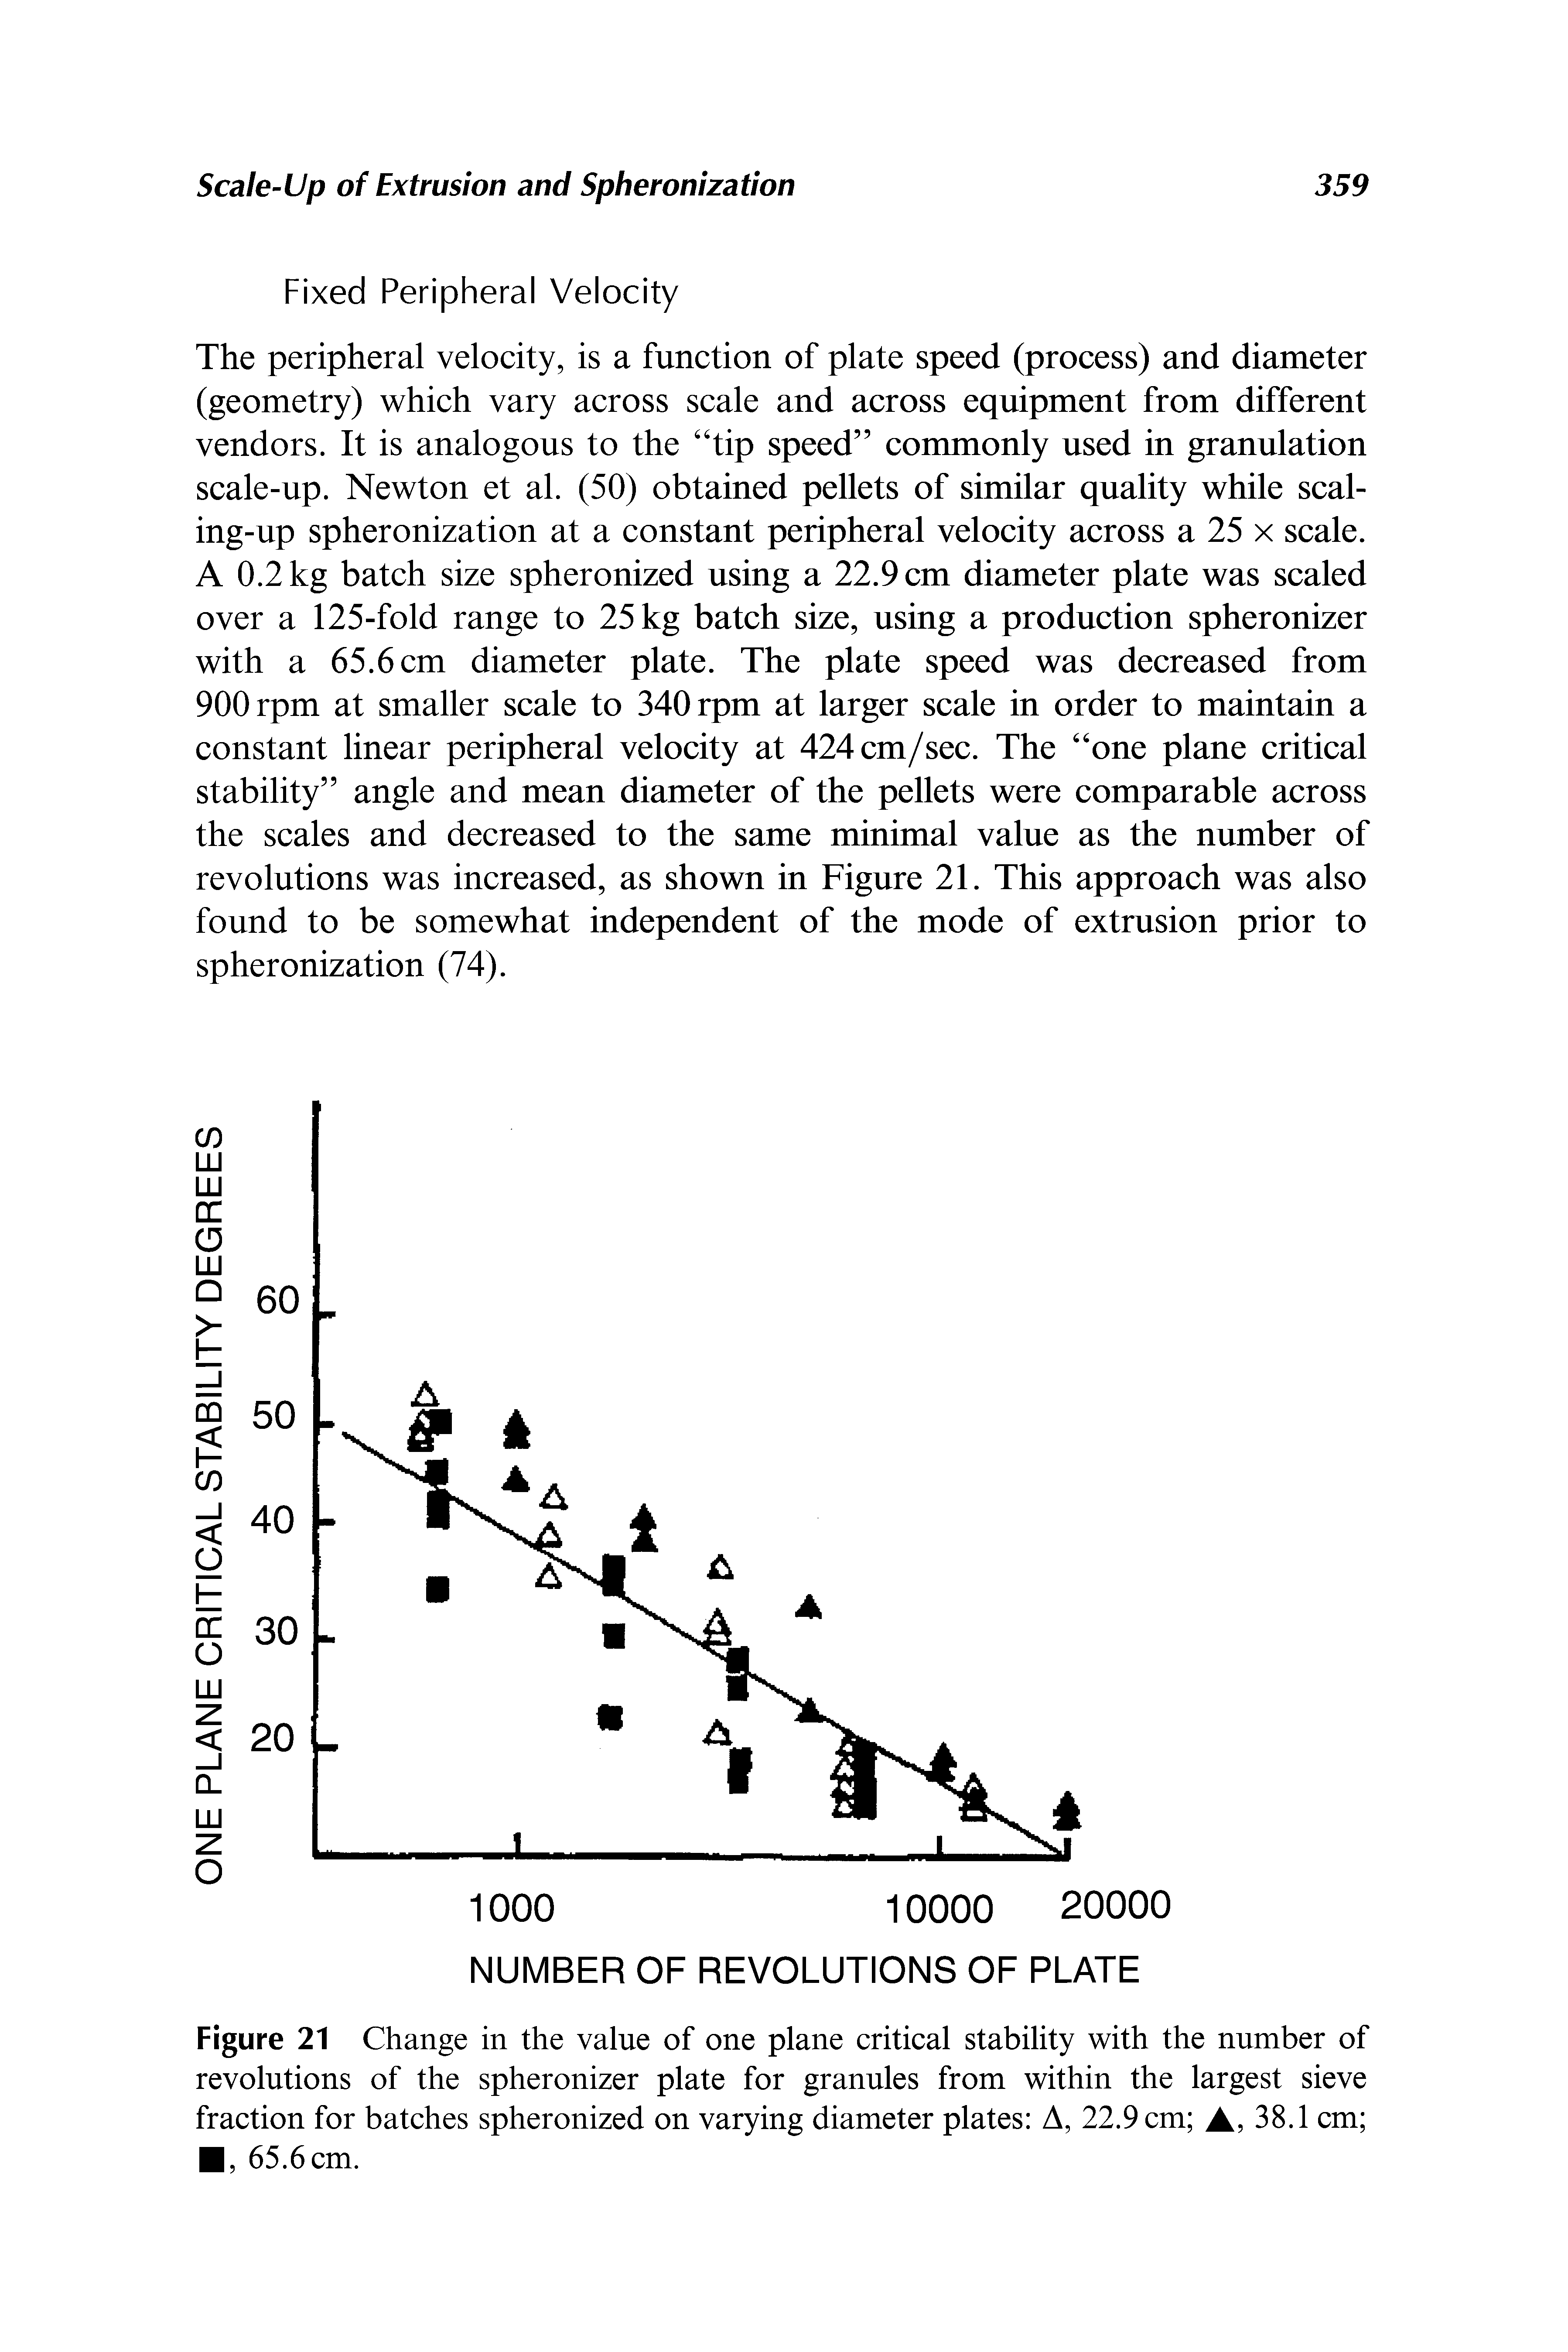 Figure 21 Change in the value of one plane critical stability with the number of revolutions of the spheronizer plate for granules from within the largest sieve fraction for batches spheronized on varying diameter plates A, 22.9 cm A, 38.1 cm , 65.6 cm.